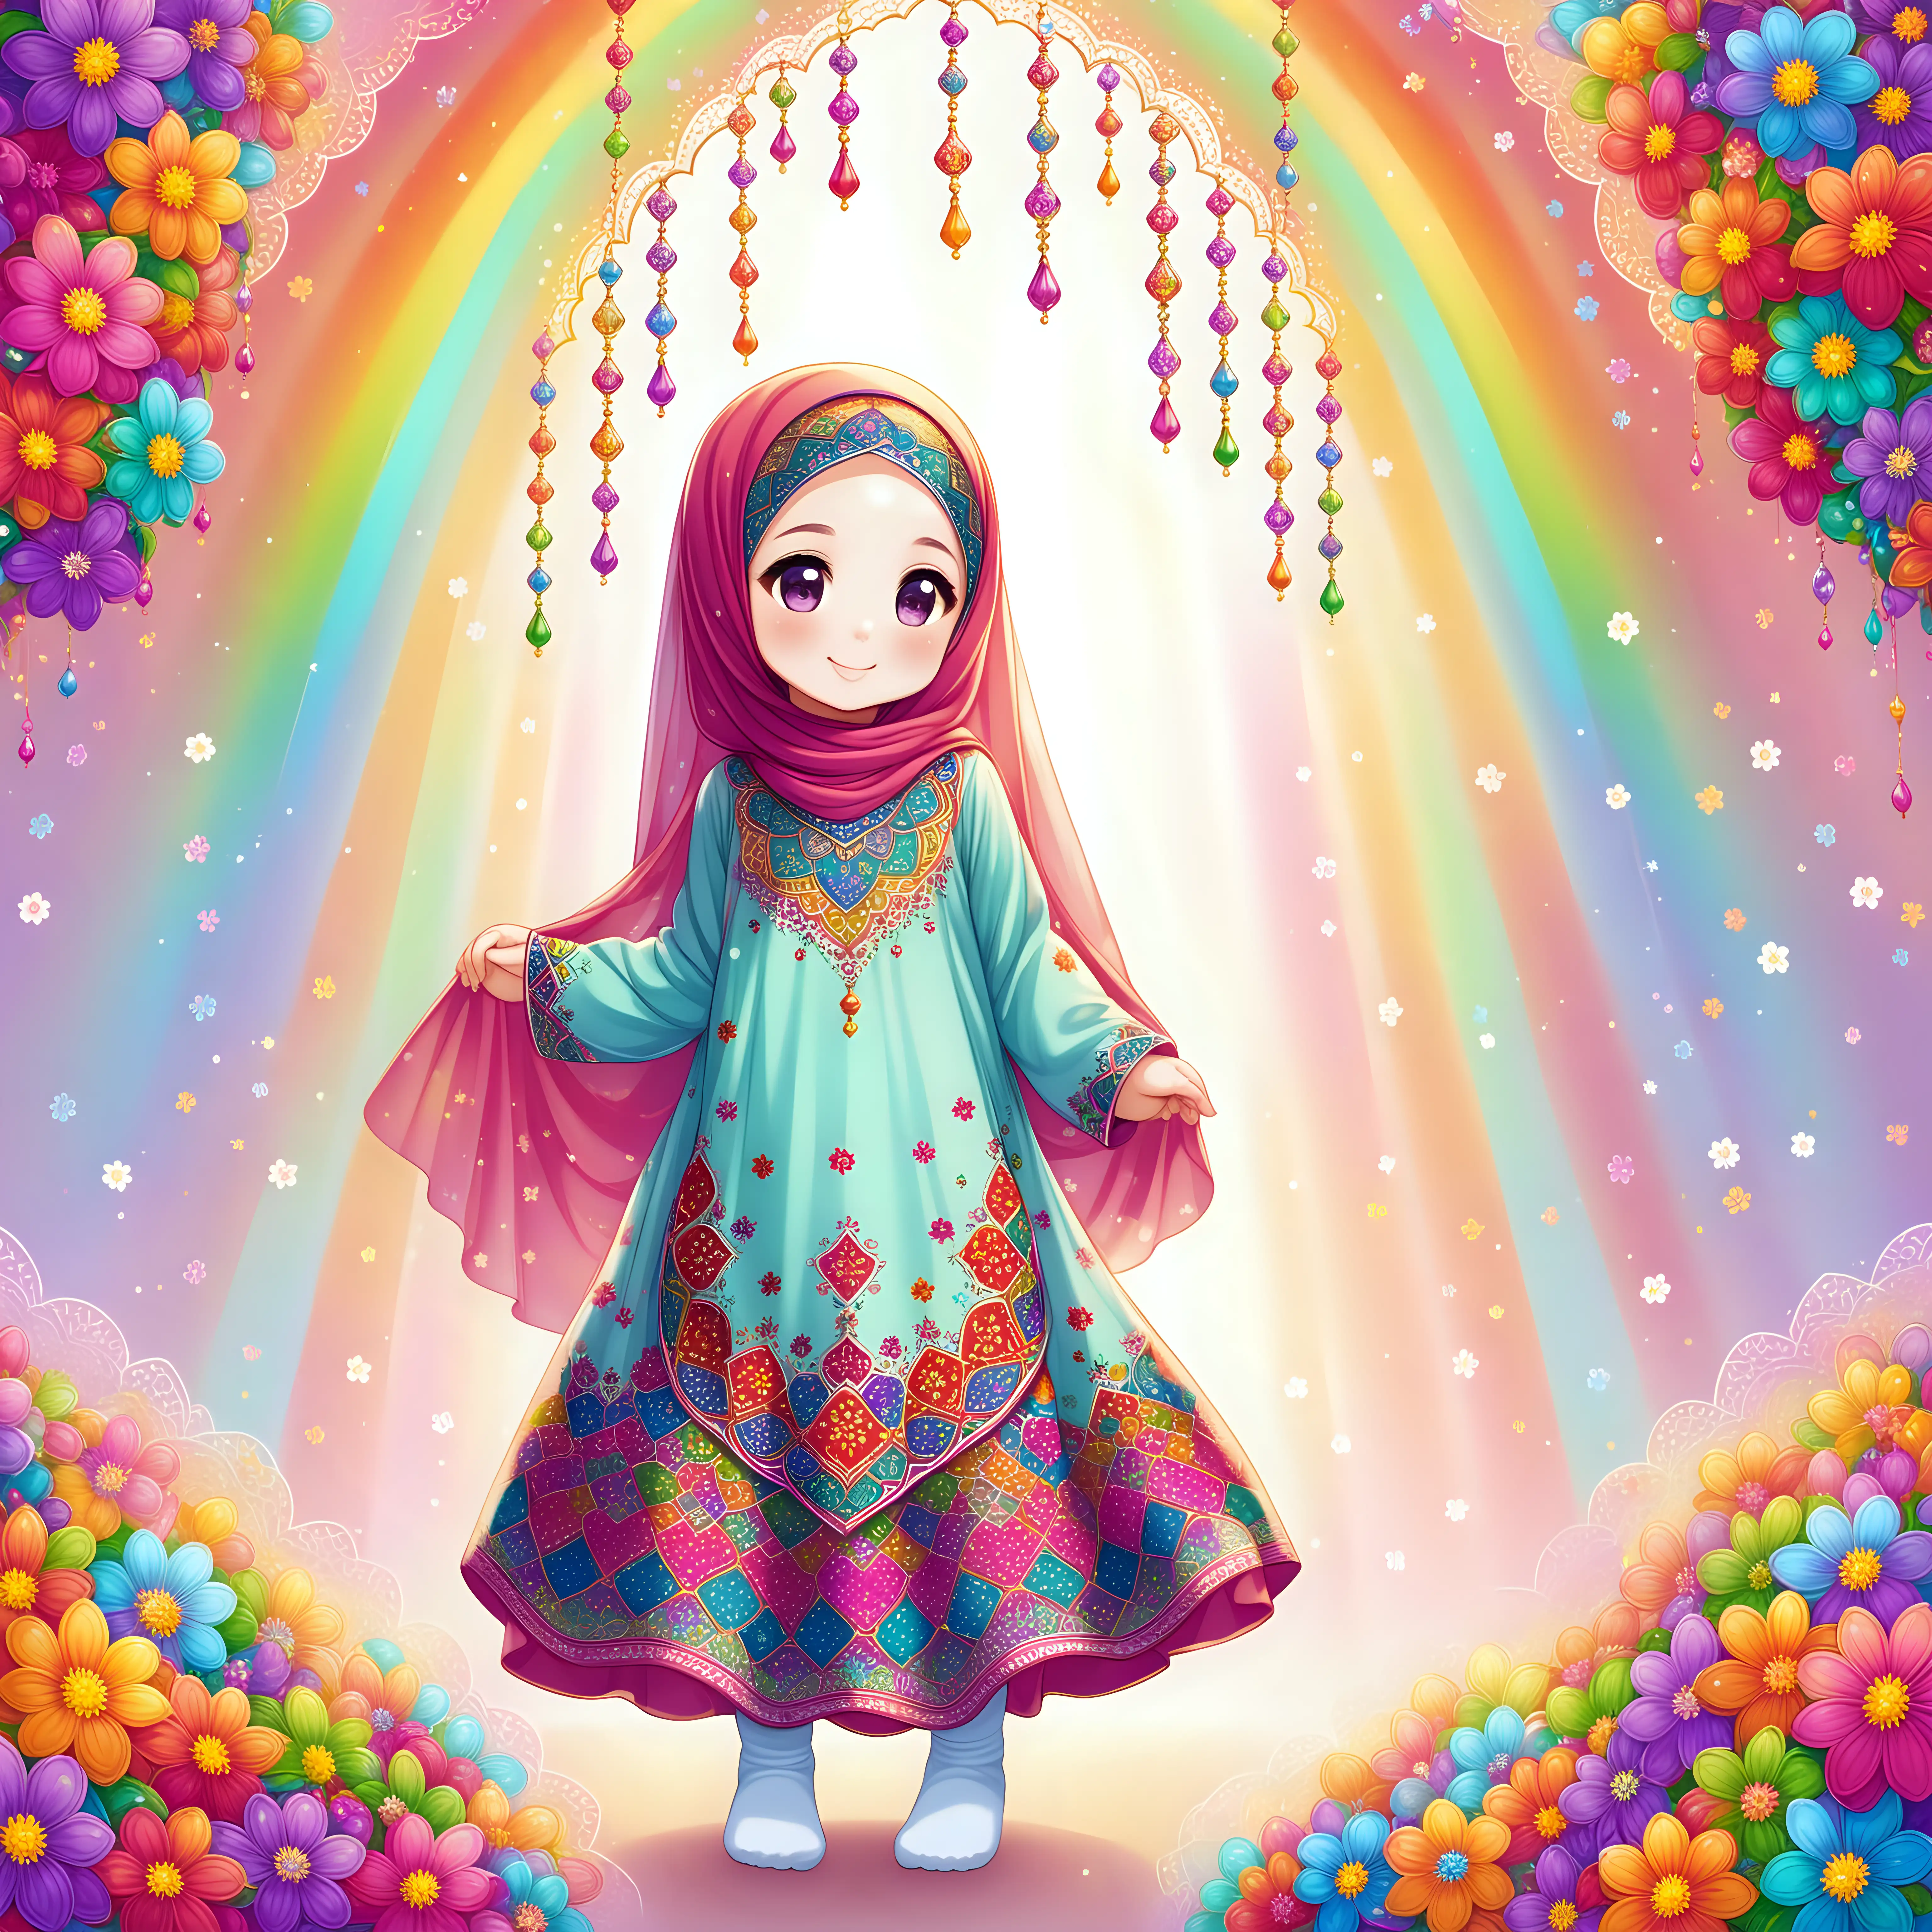 Smiling Persian Girl in Traditional Attire Surrounded by Rainbow Flowers